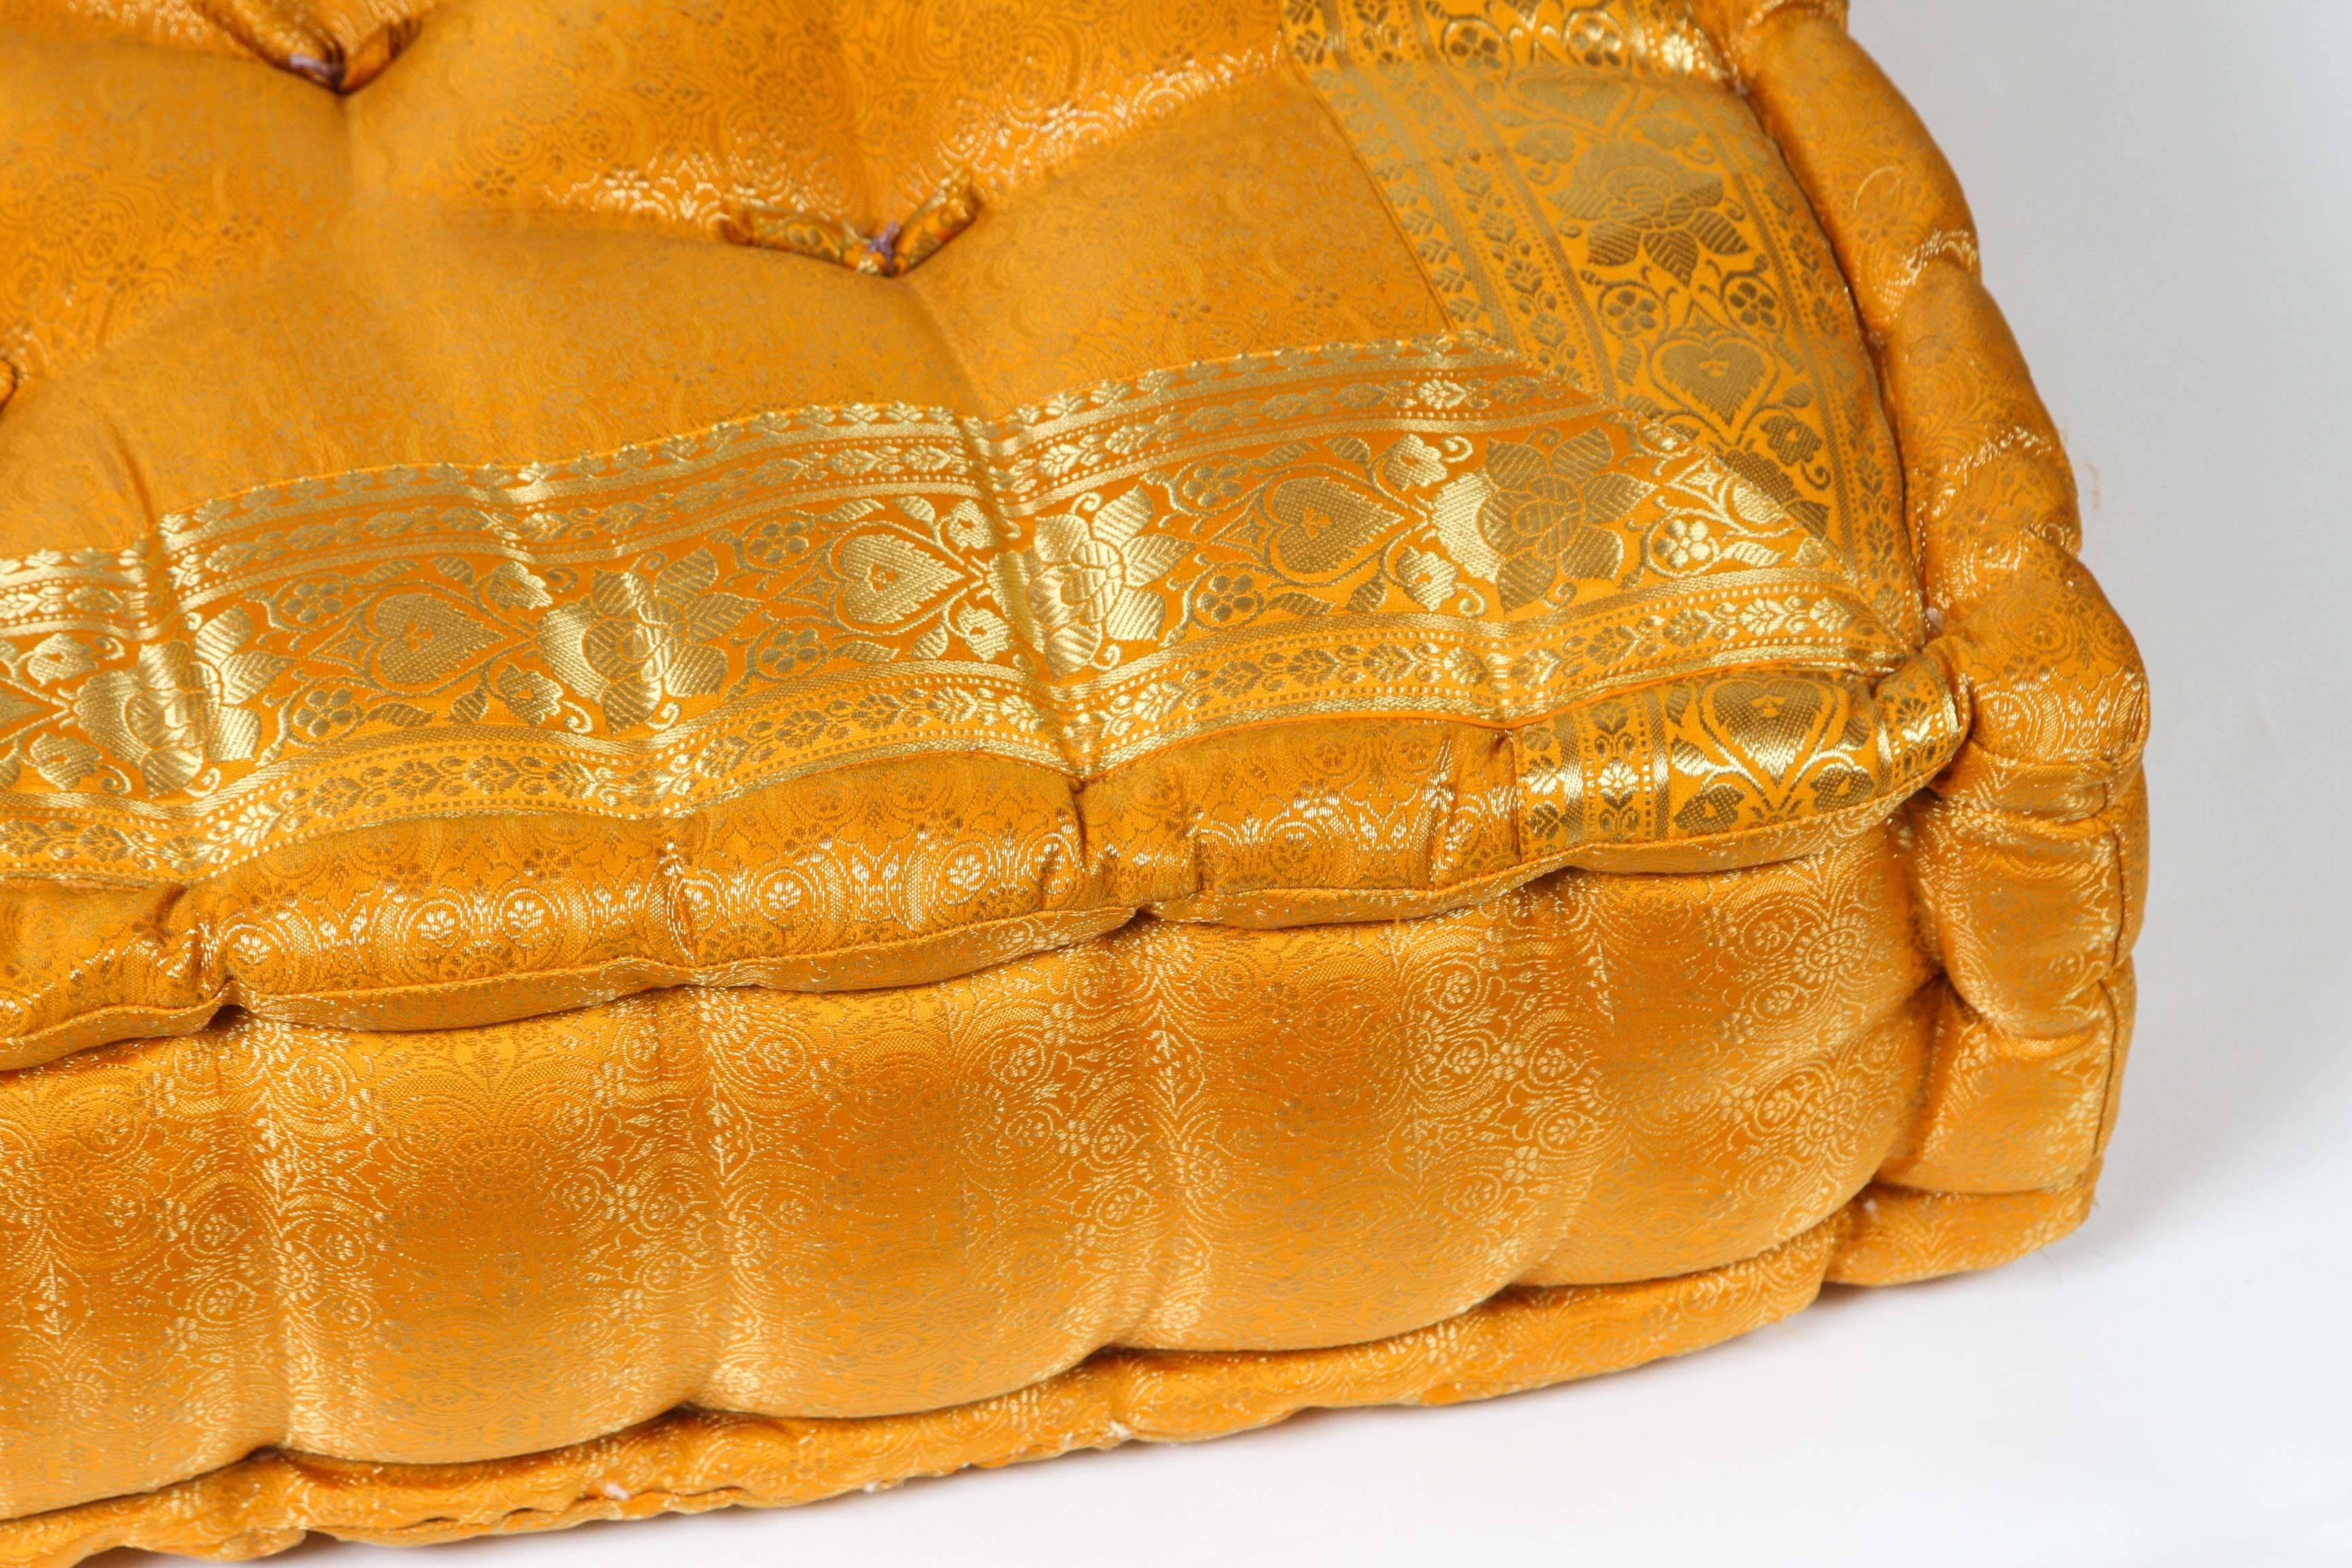 Oversized silk square yellow and gold tufted floor seat yoga pillow.
Handcrafted from silk sari fabric, these floor seat cushions are great to use in kids room or around your yoga Bohemian or Moroccan room or for your pet.
Mah Jong style hand-sewn